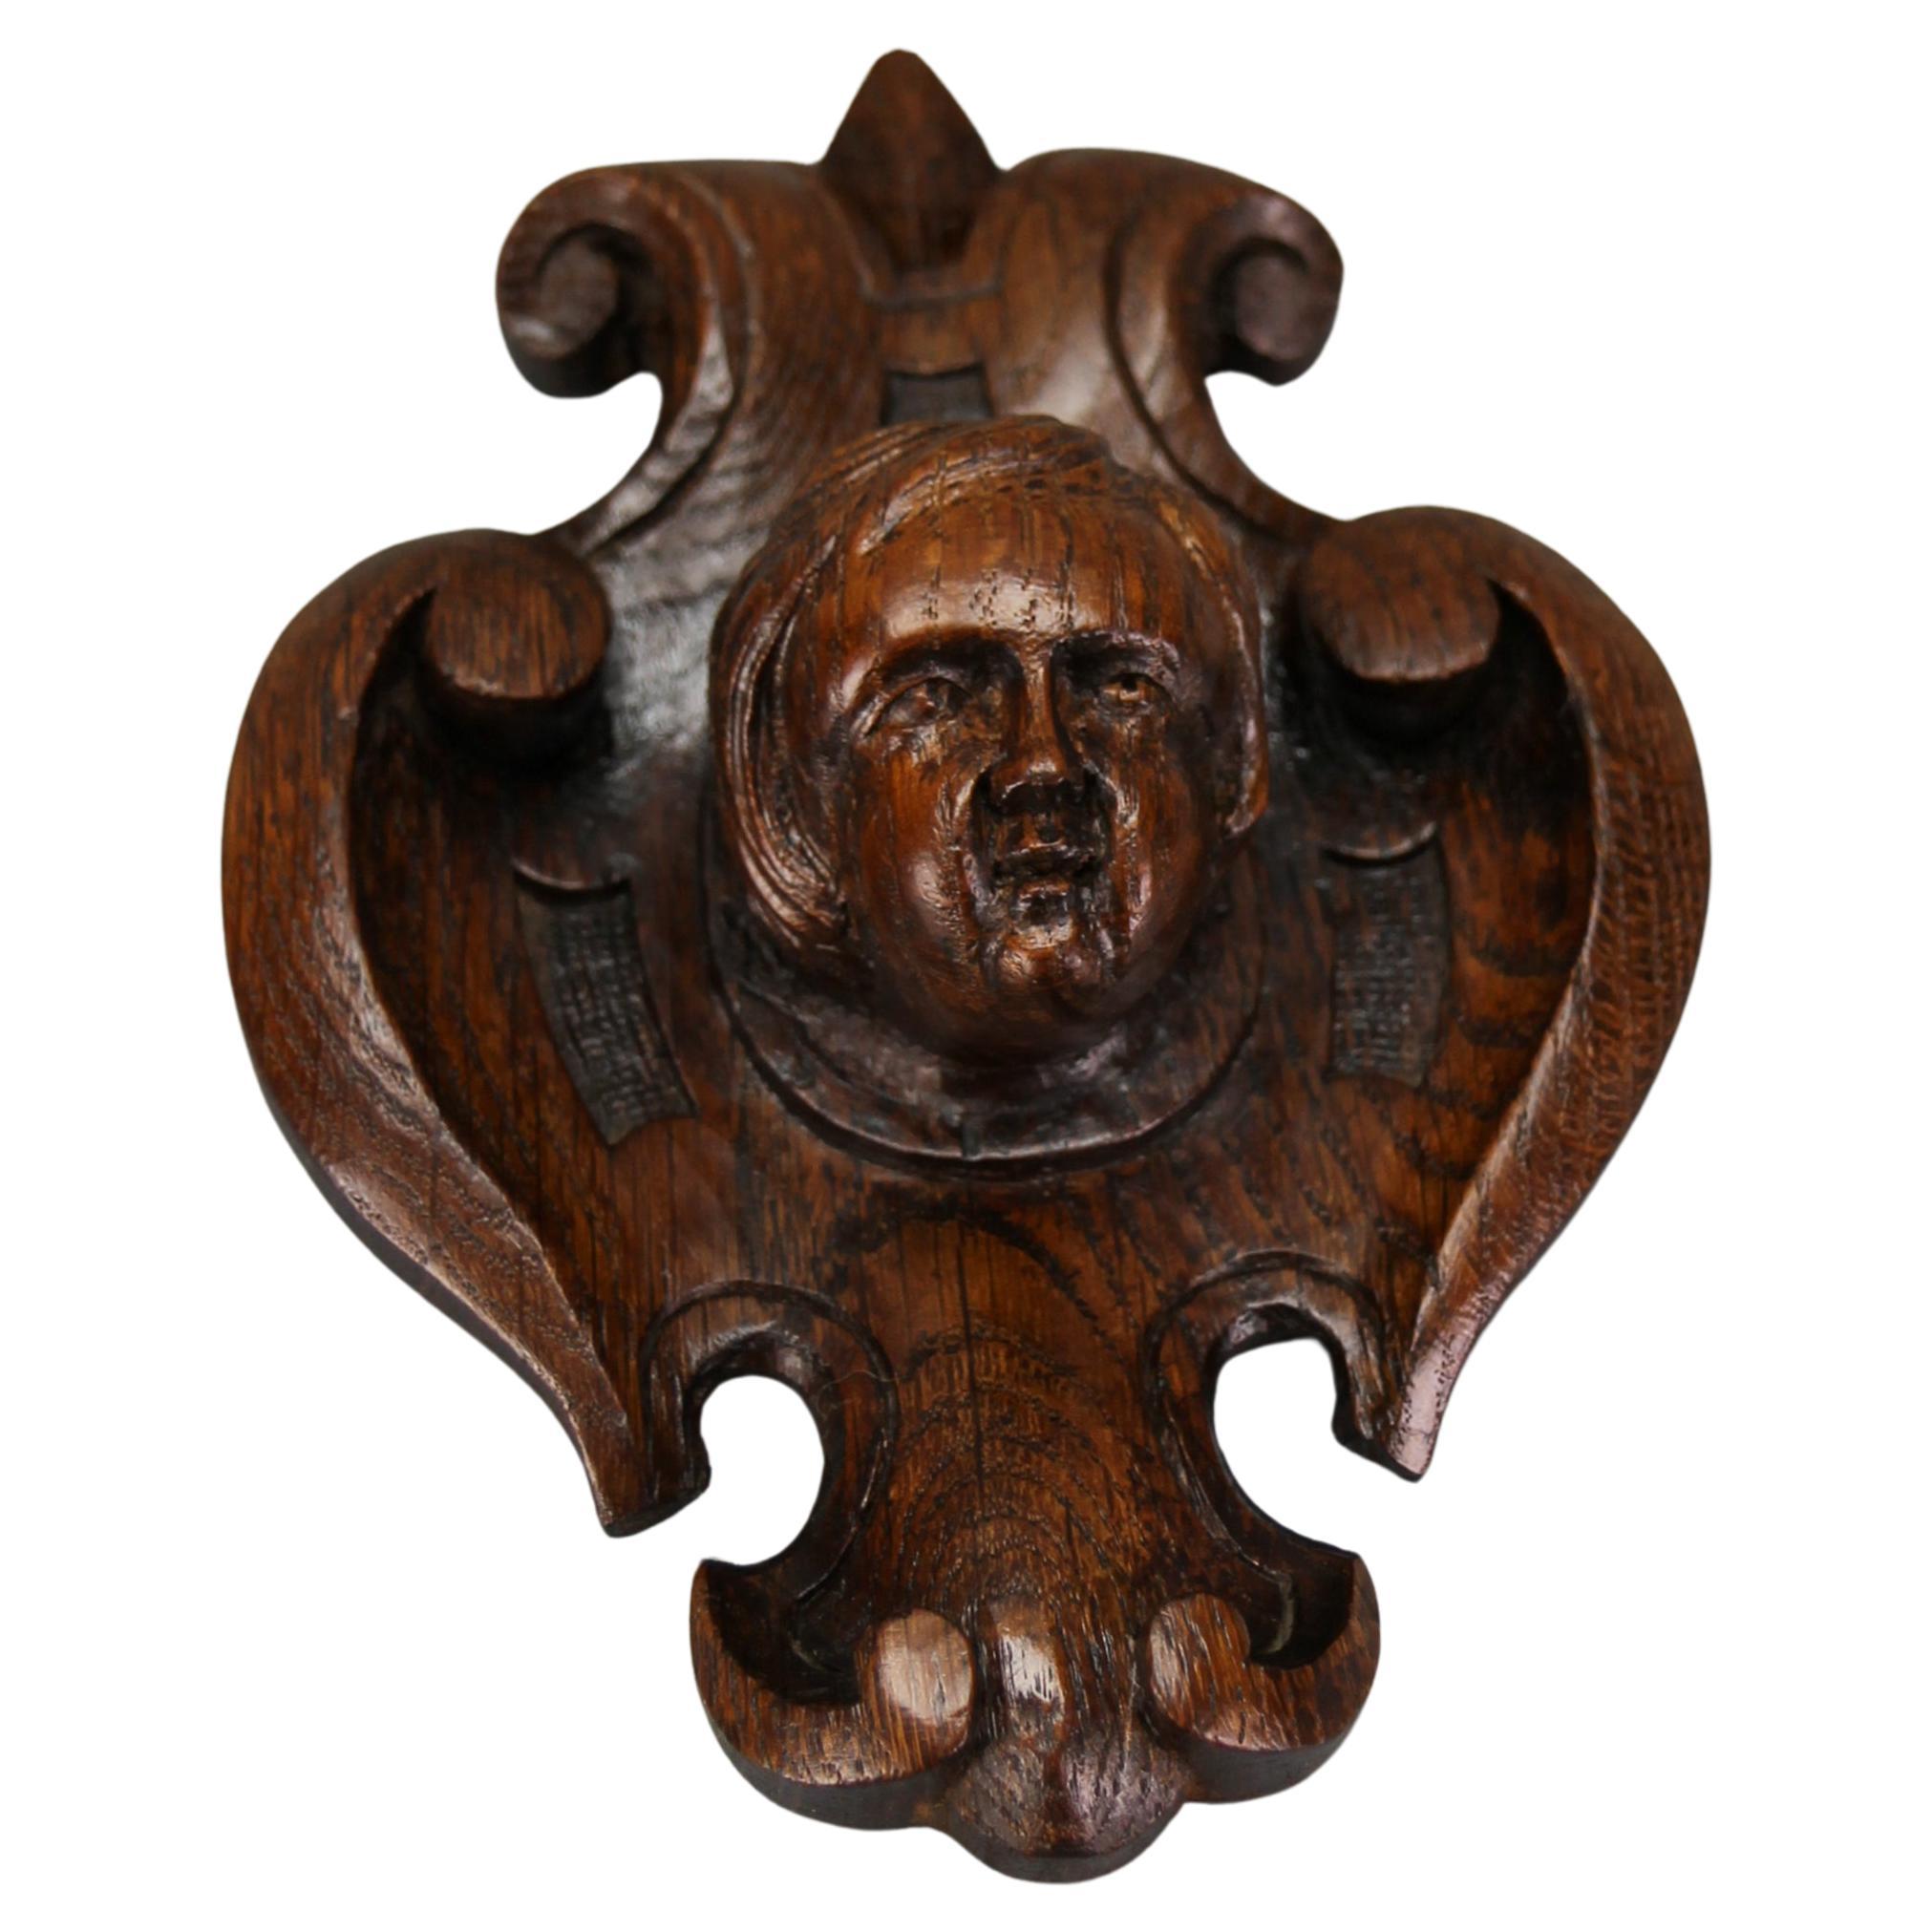 Antique French Hand-Carved Oak Wood Wall Plaque with Cherub's Head, ca. 1900